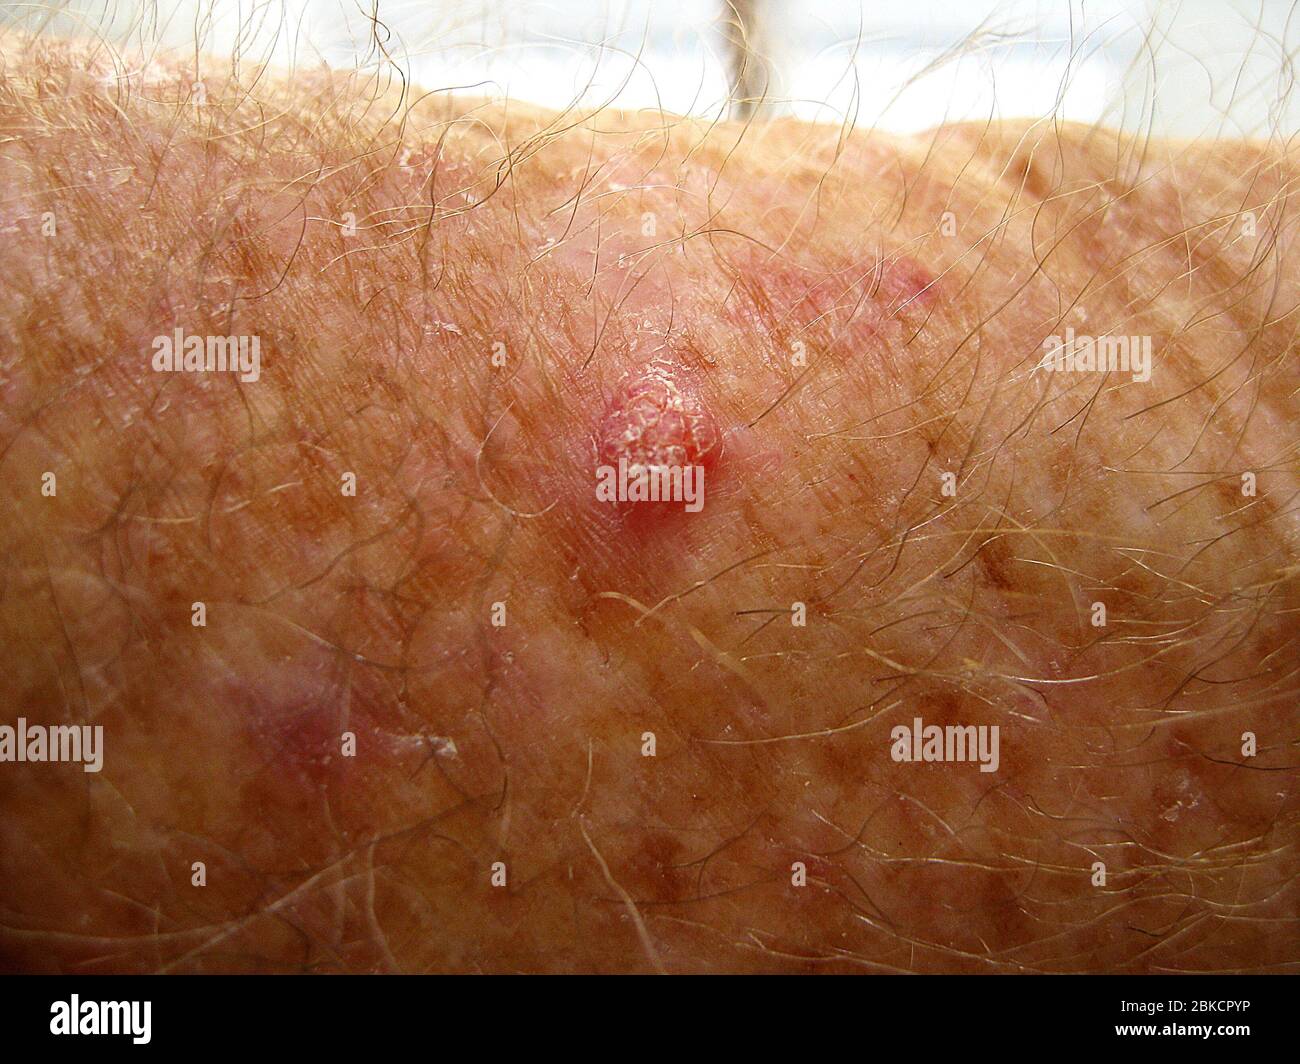 Skin cancer is evident in this top view of a squamous cell carcinoma on the hairy arm of a Caucasian man. Most often caused by years of exposure to the sun's ultraviolet (UV) rays, it is one of the most common types of skin cancer. Treatment for such hard lumps with scaly tops is usually surgical removal by a dermatologist. Avoiding prolonged exposure to ultraviolet radiation and the use of sunscreen are recommended ways to prevent skin cancers. Stock Photo